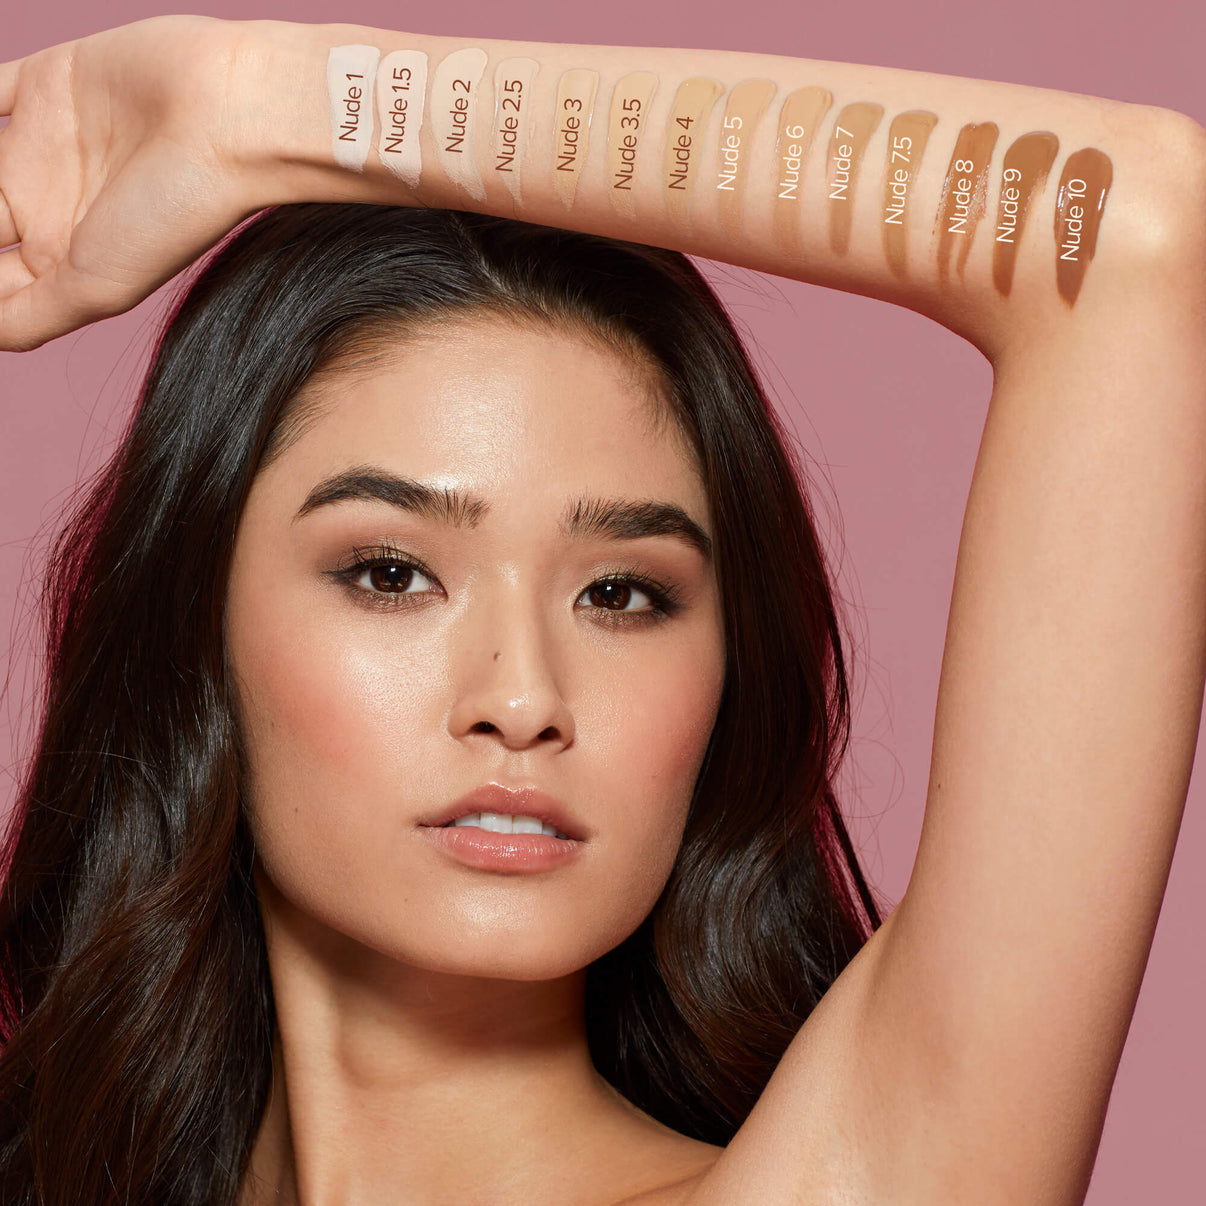 Young woman with arm swatches of Tinted Cover nude 9 and other shades